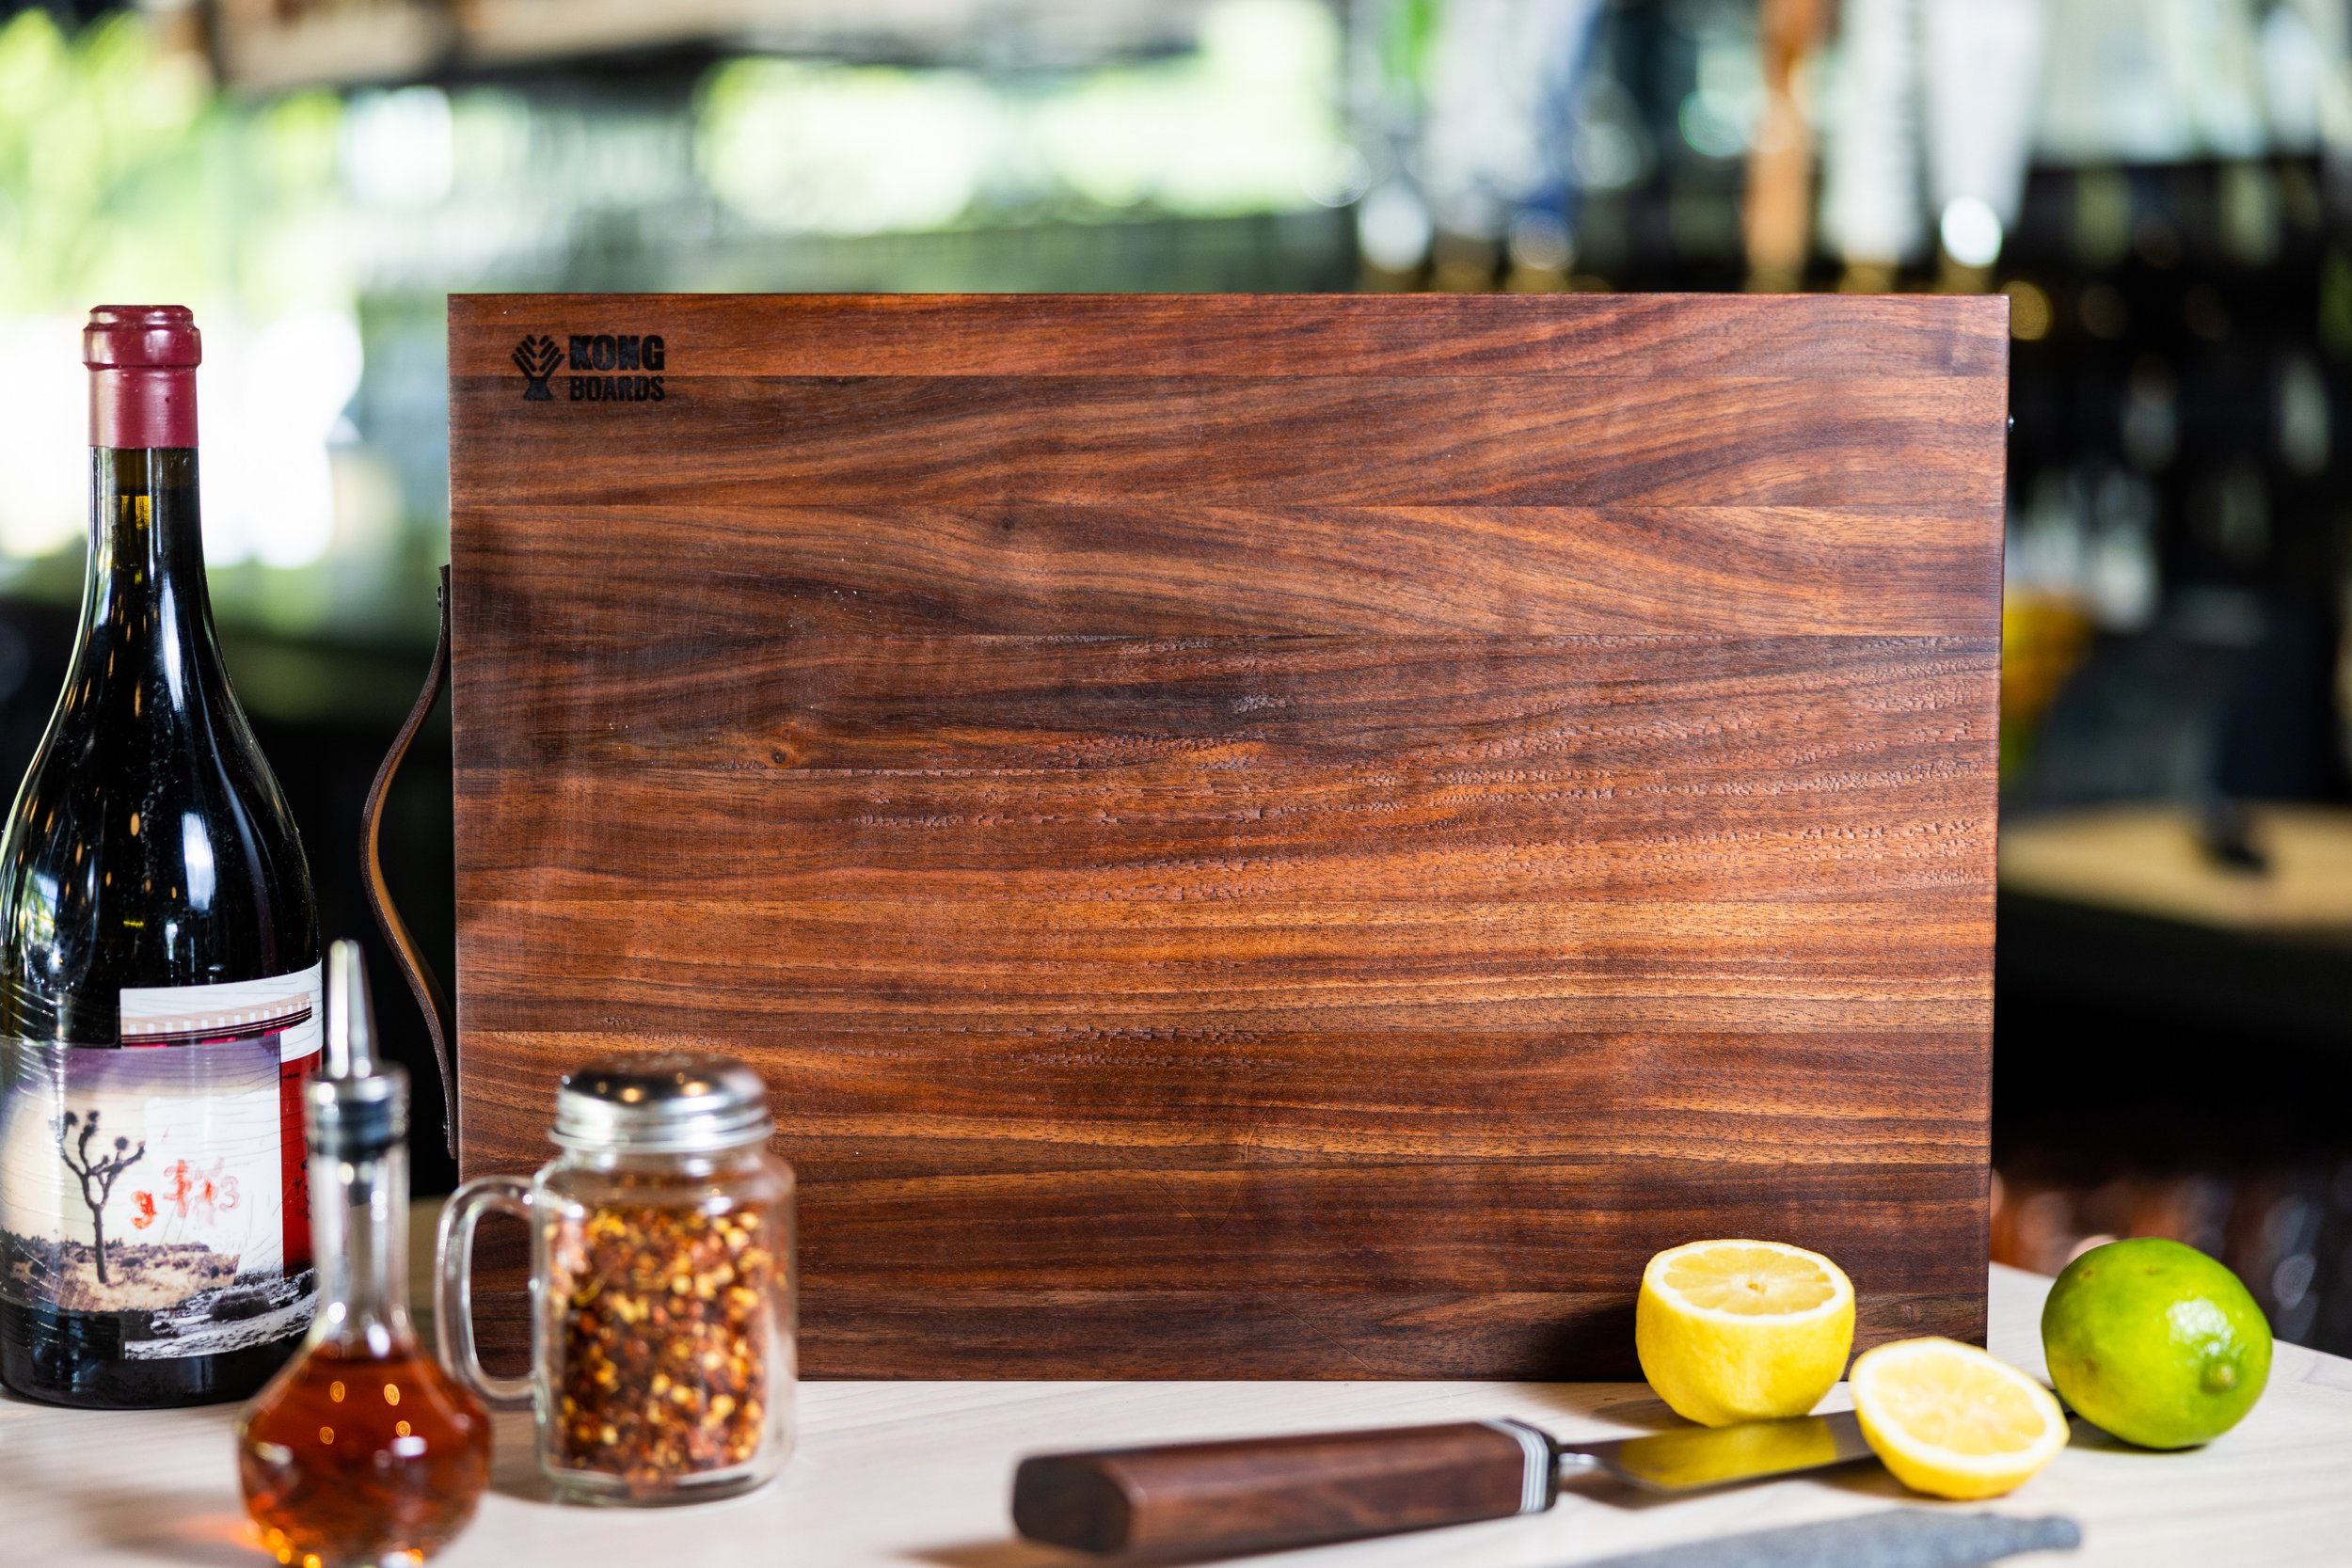 How to Add a Leather Handle to a Cutting Board